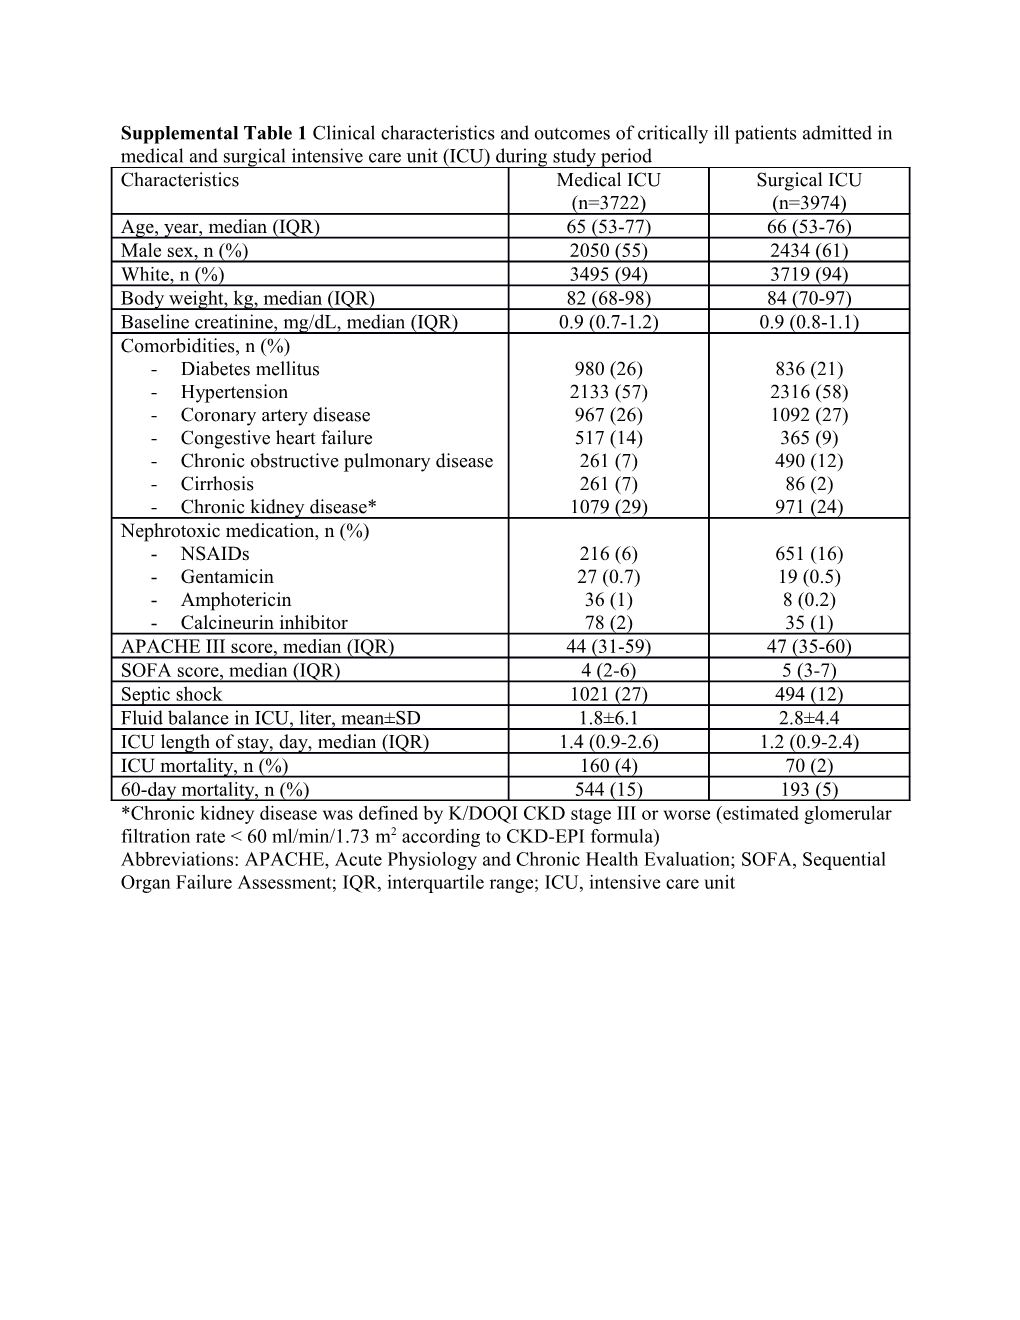 Supplemental Table 1 Clinical Characteristics and Outcomes of Critically Ill Patients